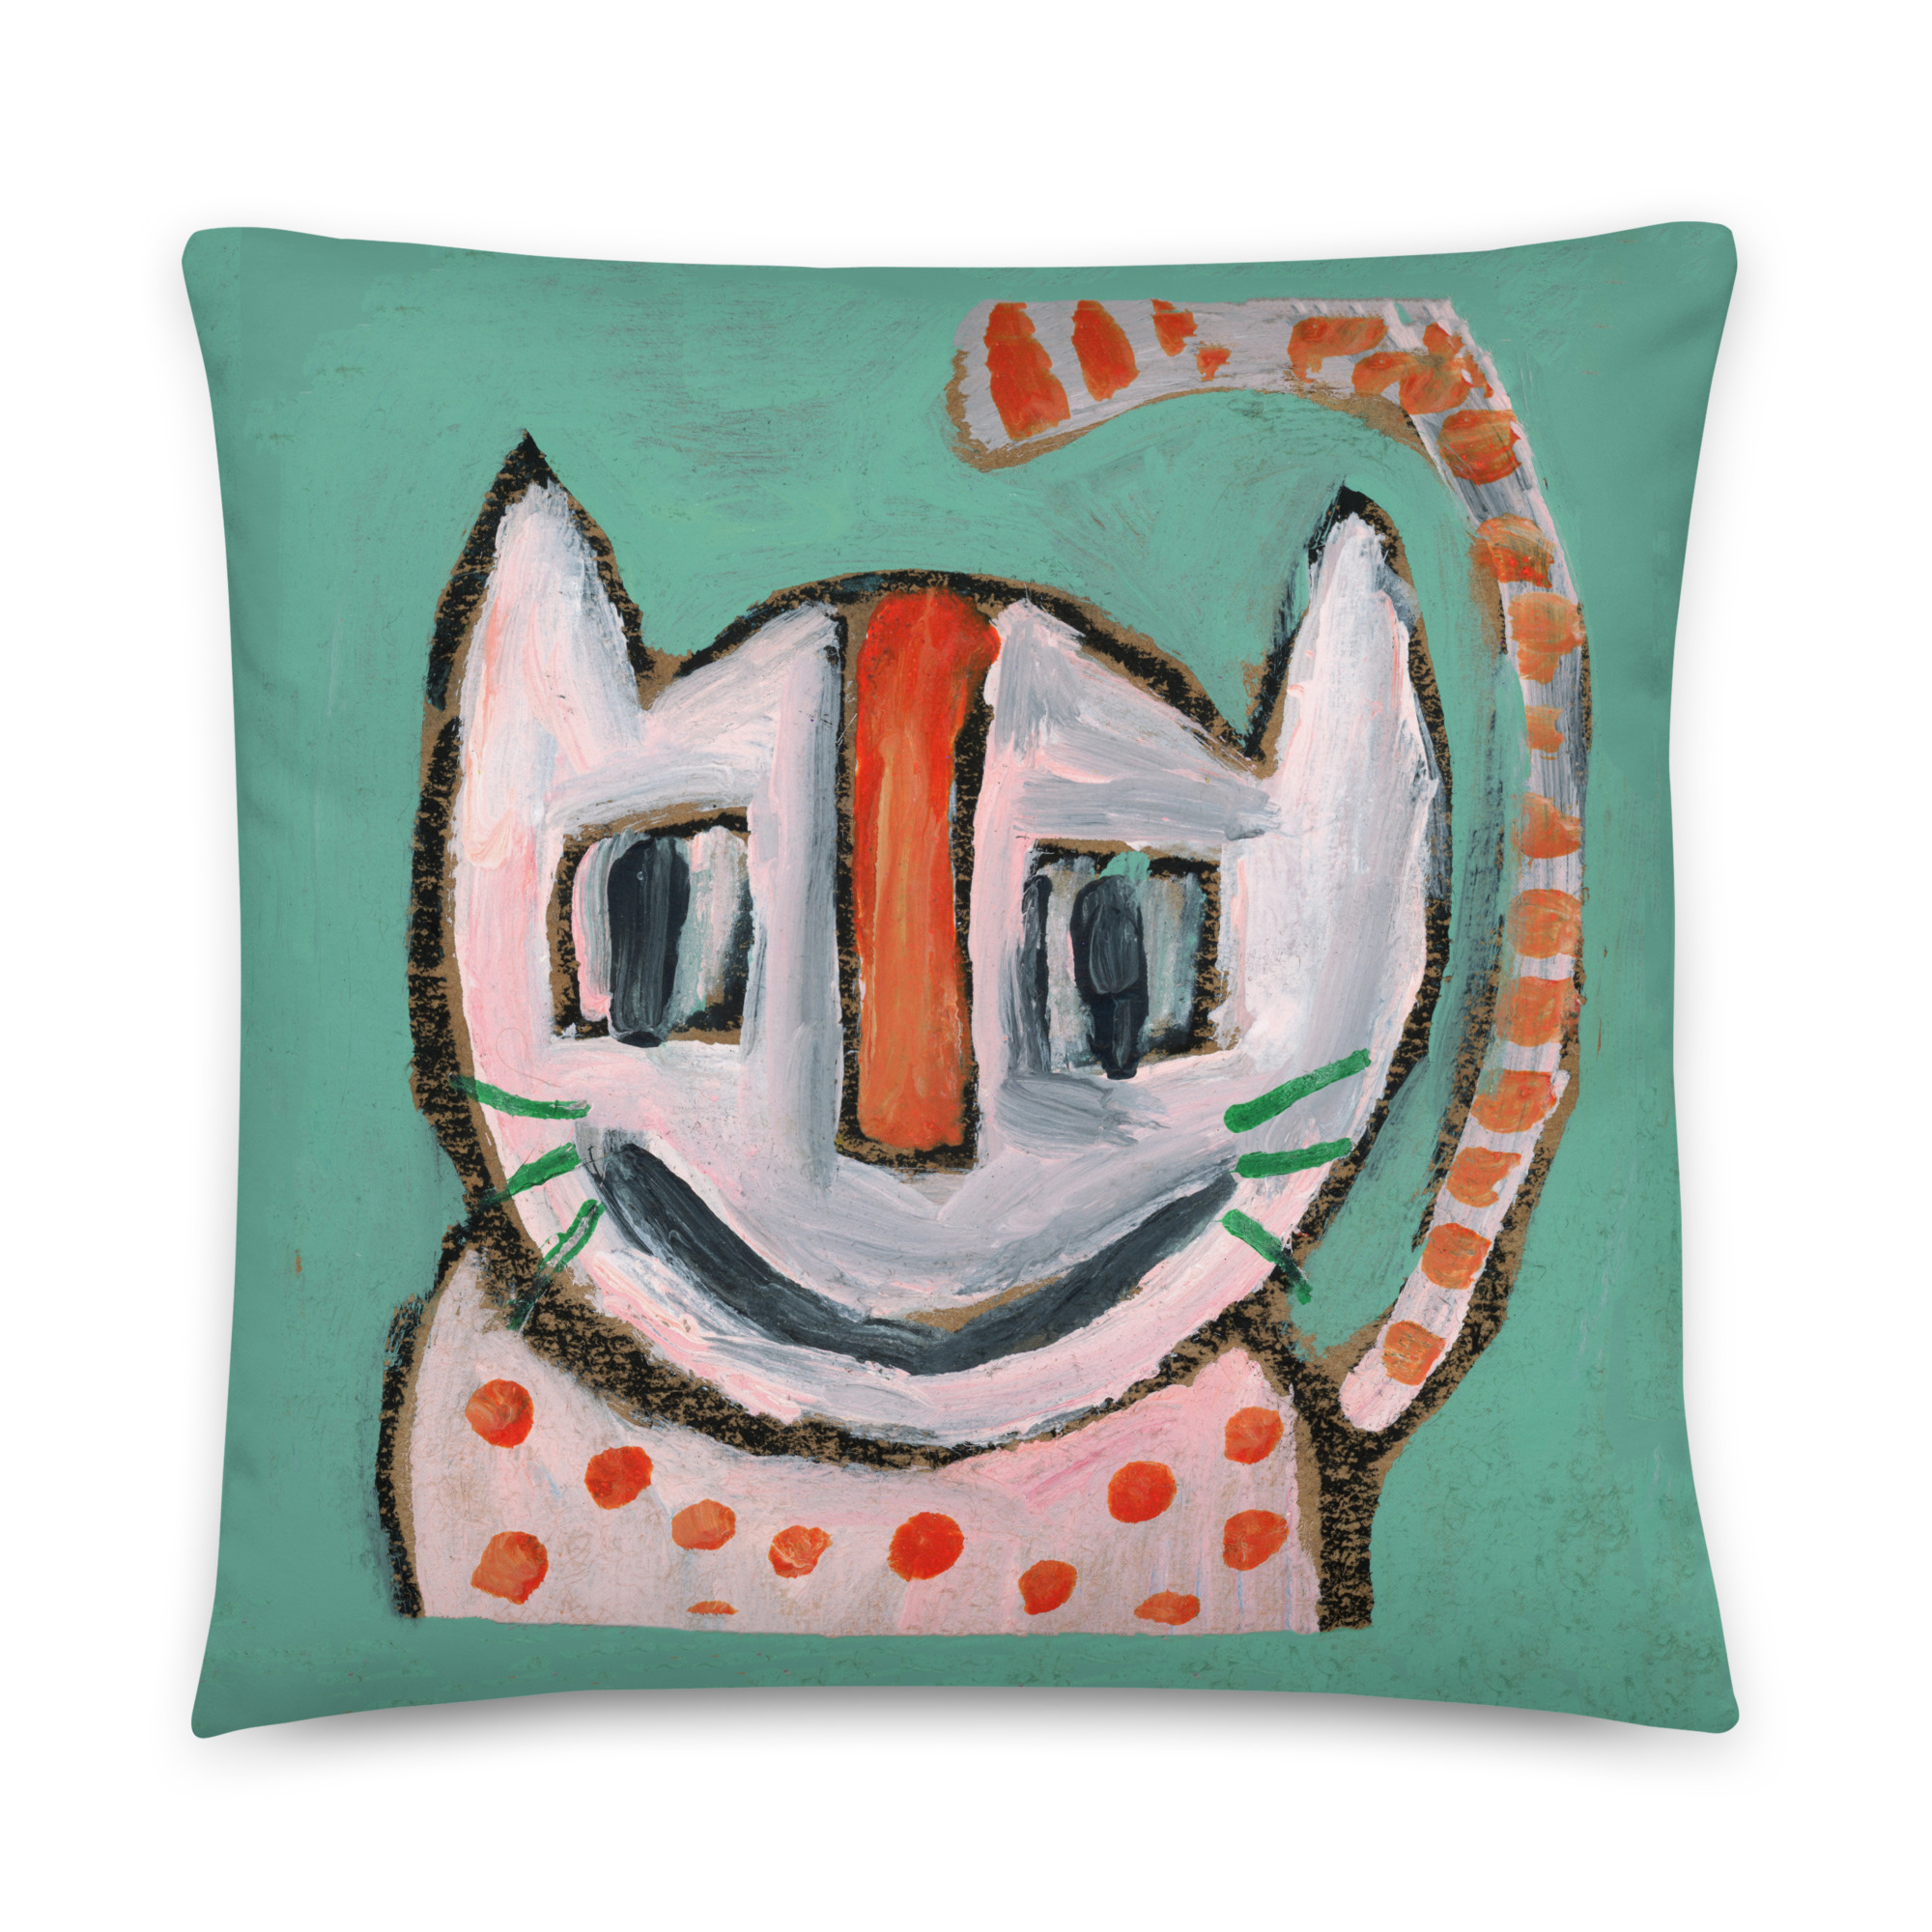 Katie Jeanne Wood - silly cat no 3 throw pillow